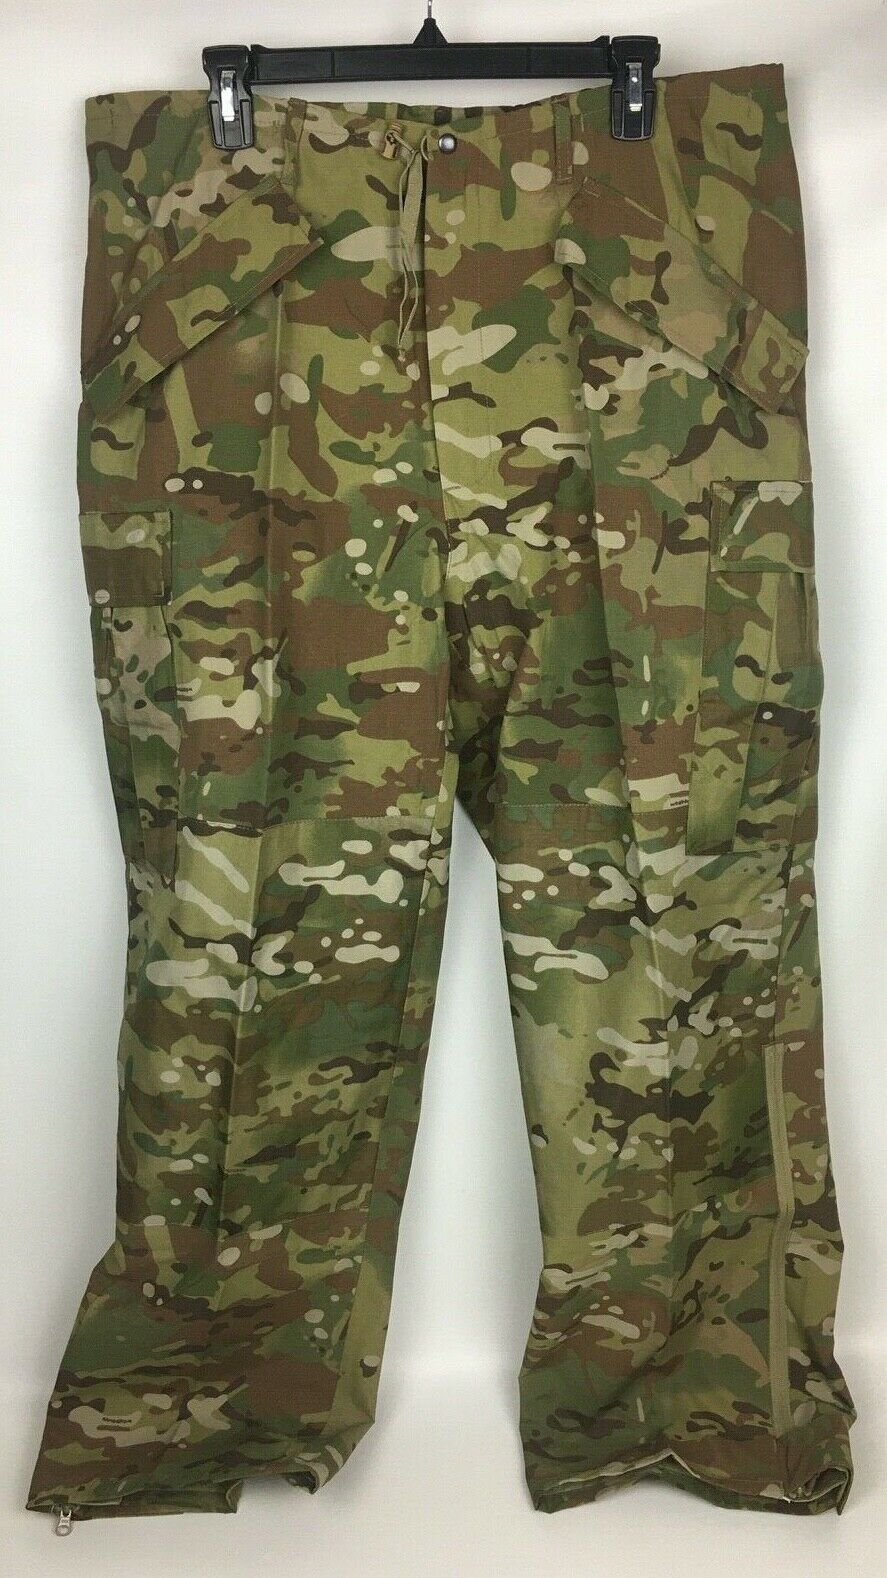 New CAMOGROM All-Purpose Environmental Trousers APECS Style Large Regular 